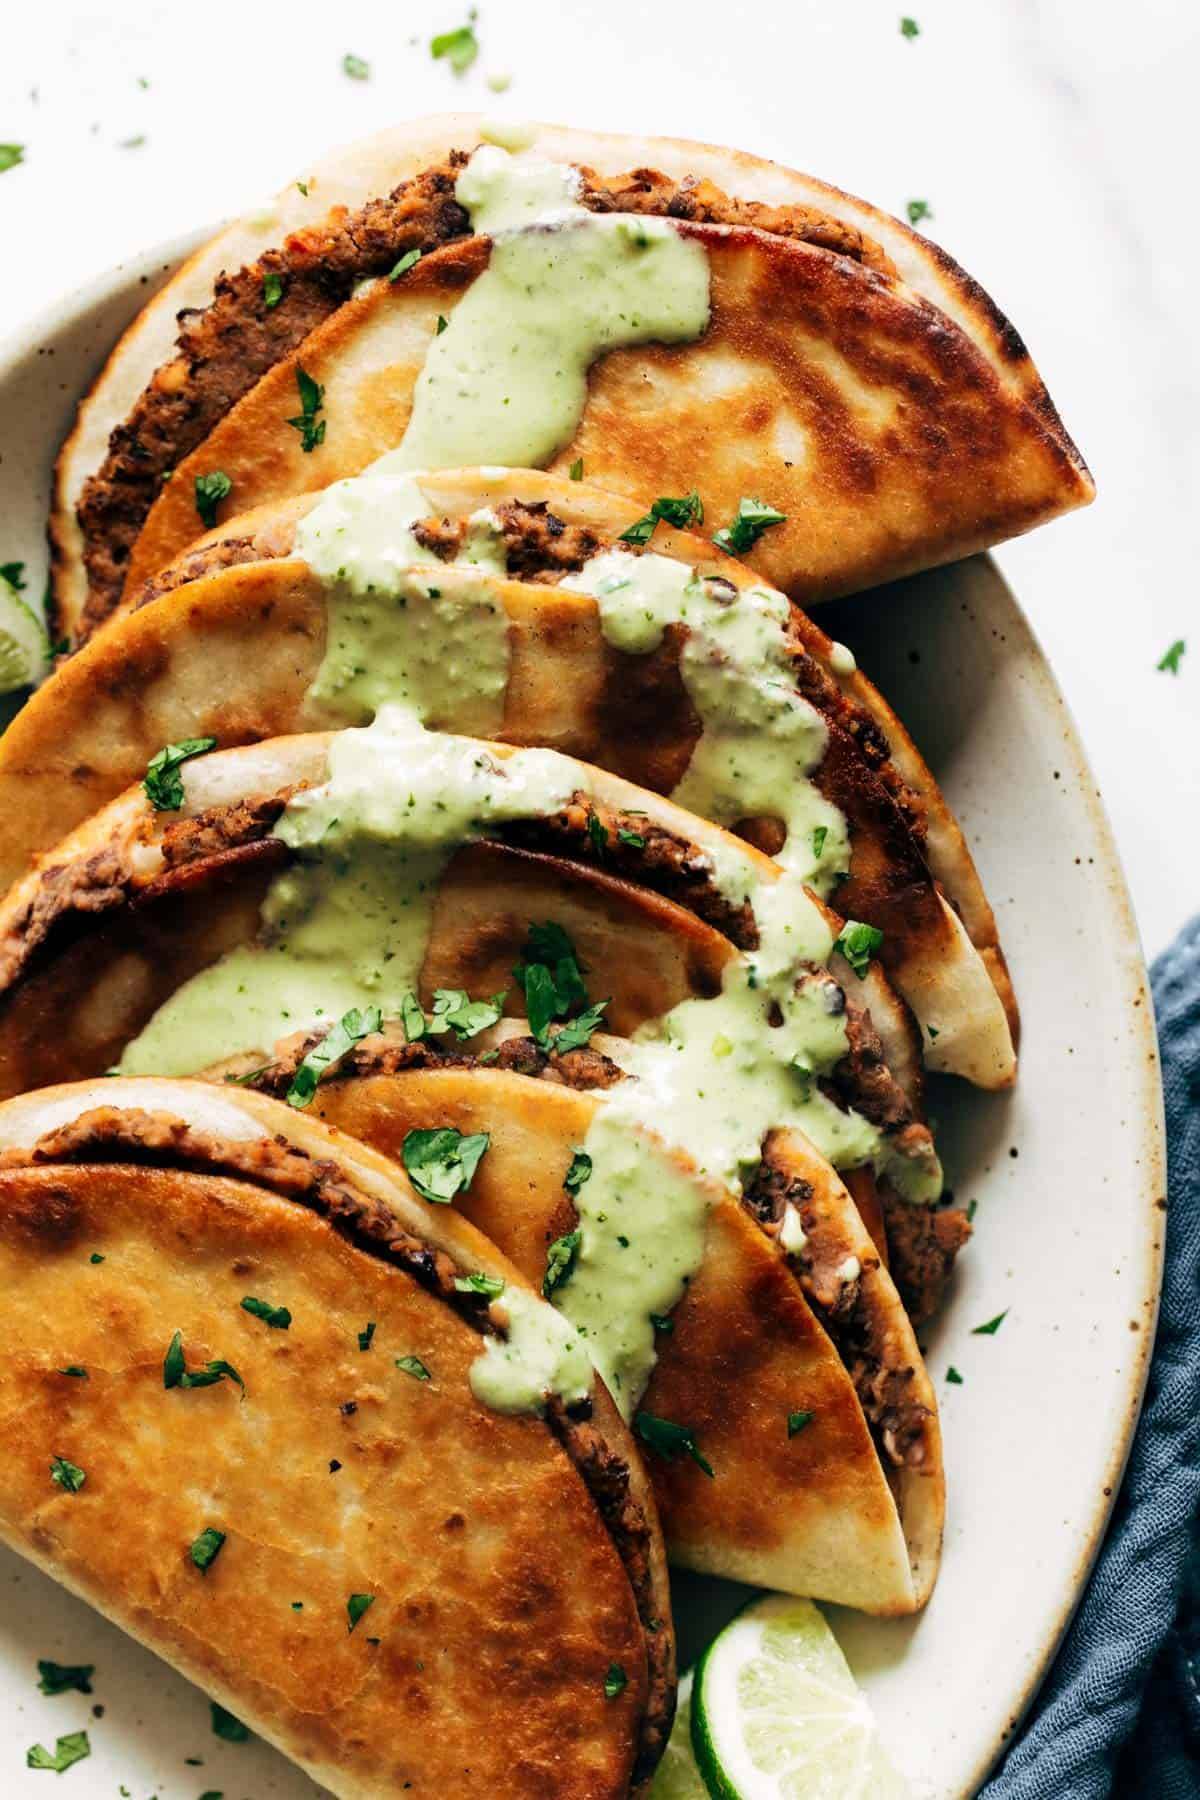 Crispy Black Bean Tacos drizzled with Cilantro Lime Sauce